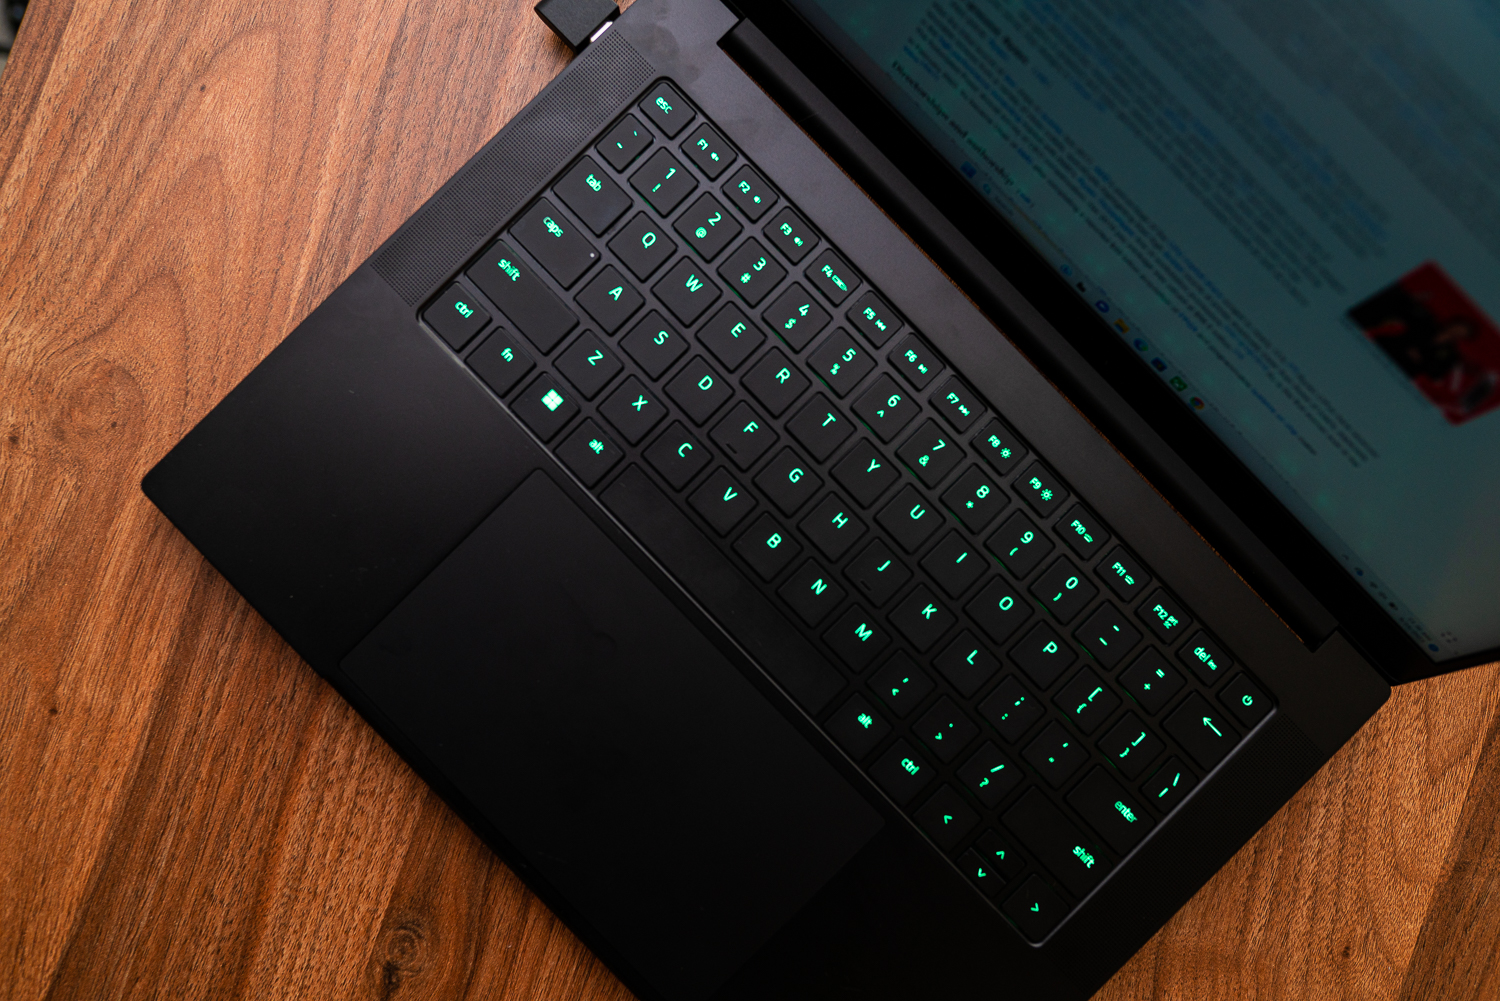 The keyboard of the Razer Blade 14 on a wooden table.